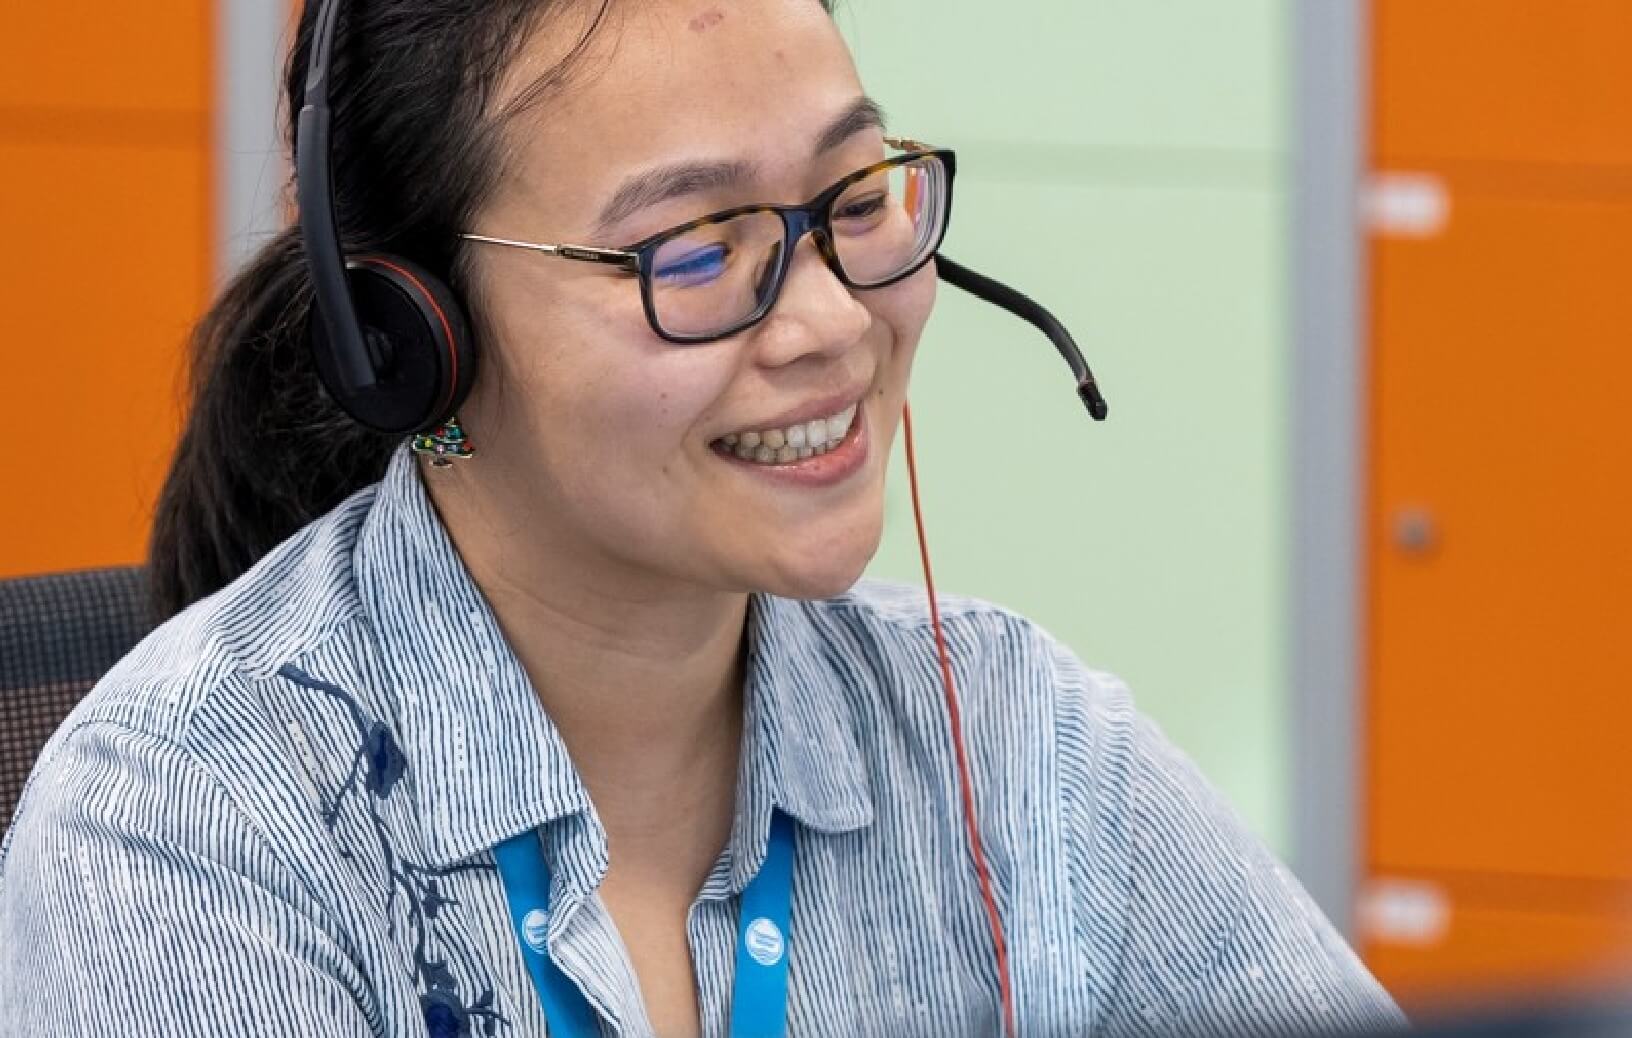 Person smiling talking on headset